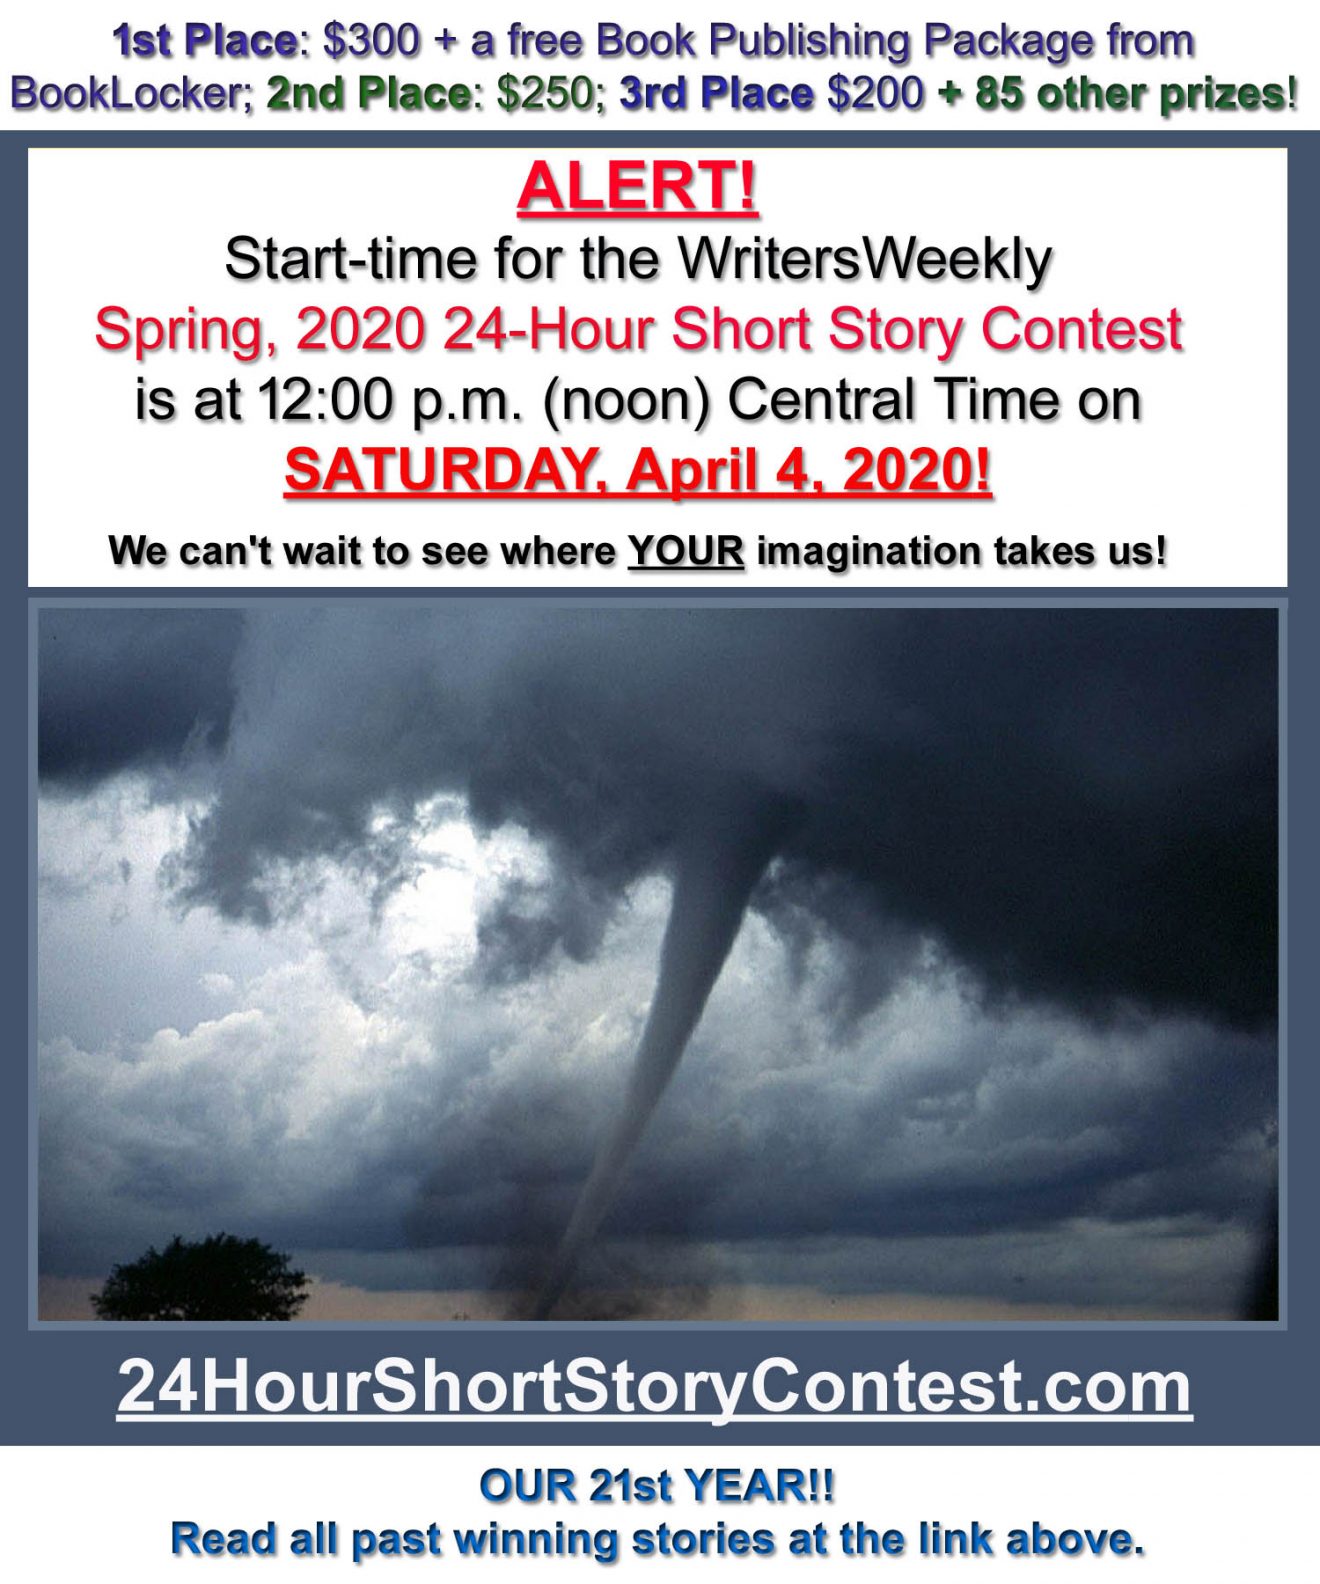 LAST CHANCE! THIS SATURDAY!! What will the Spring, 2020 24-Hour Short Story Contest Topic Be?!?!